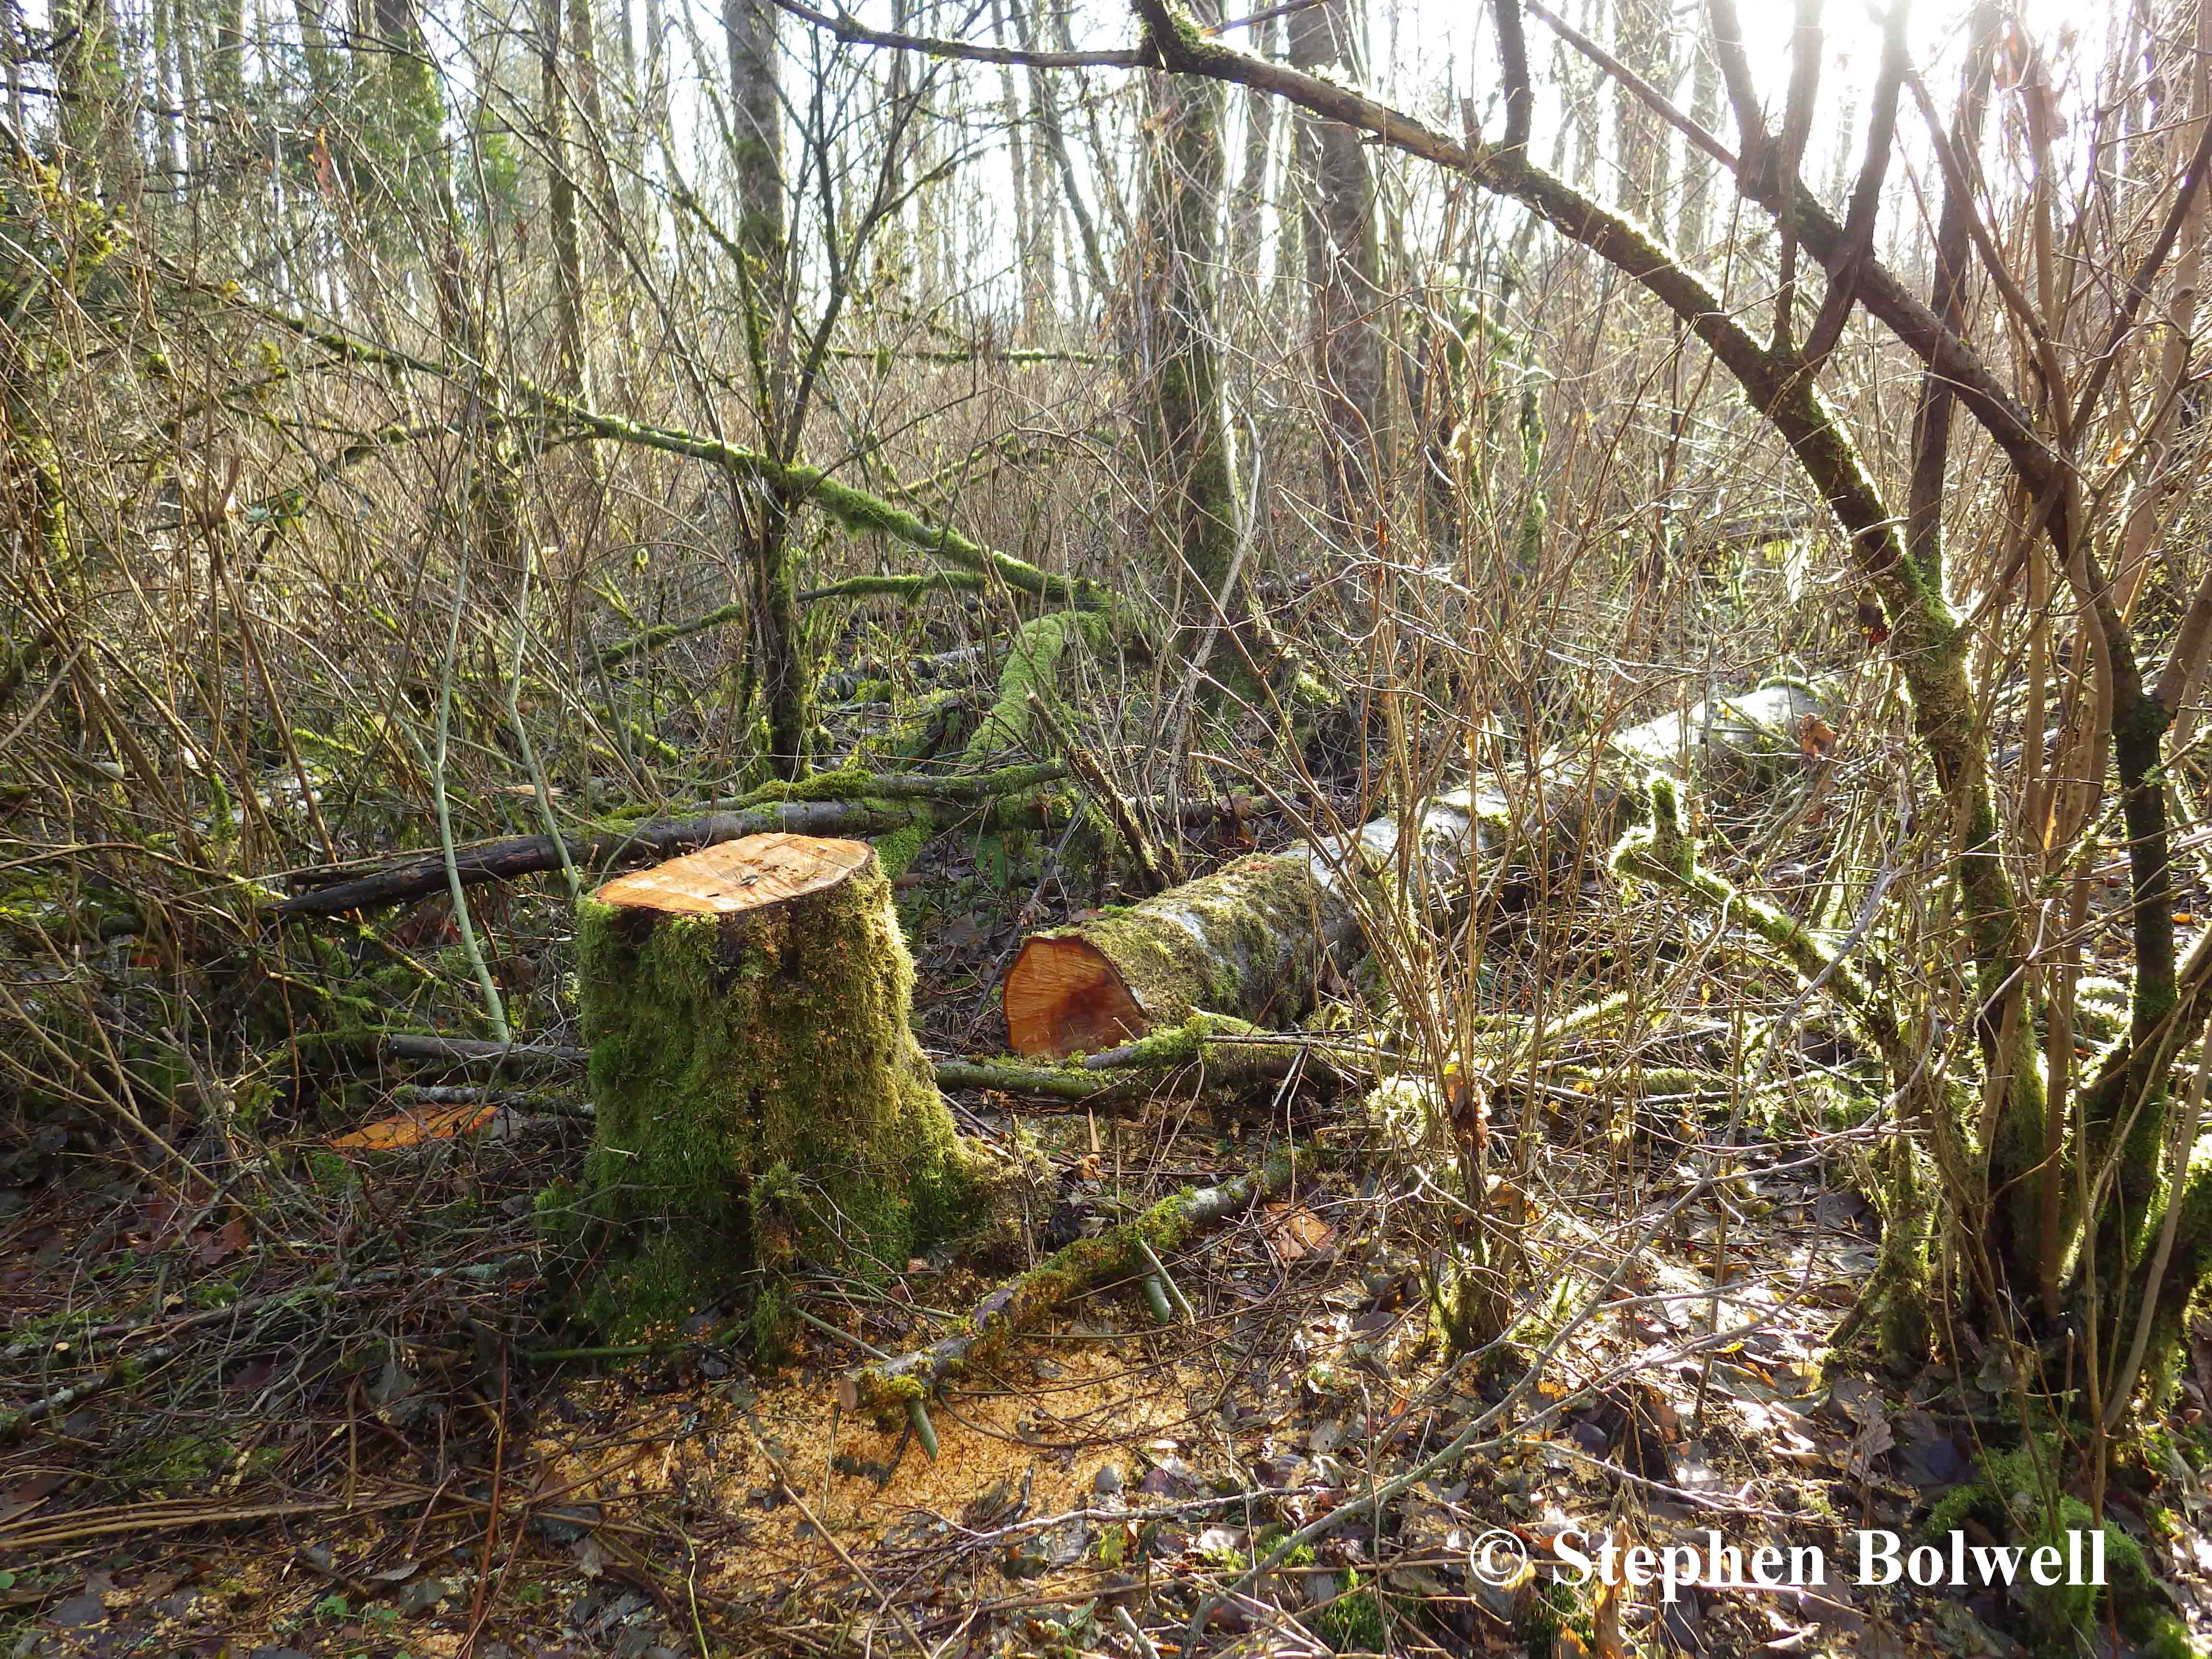 This one probably could have stayed upright. When the edge of a woodland is cut, the tree line becomes irregular and there is good scientific evidence to show that the remaining trees become more vulnerable to an increase in swirling wind movement.